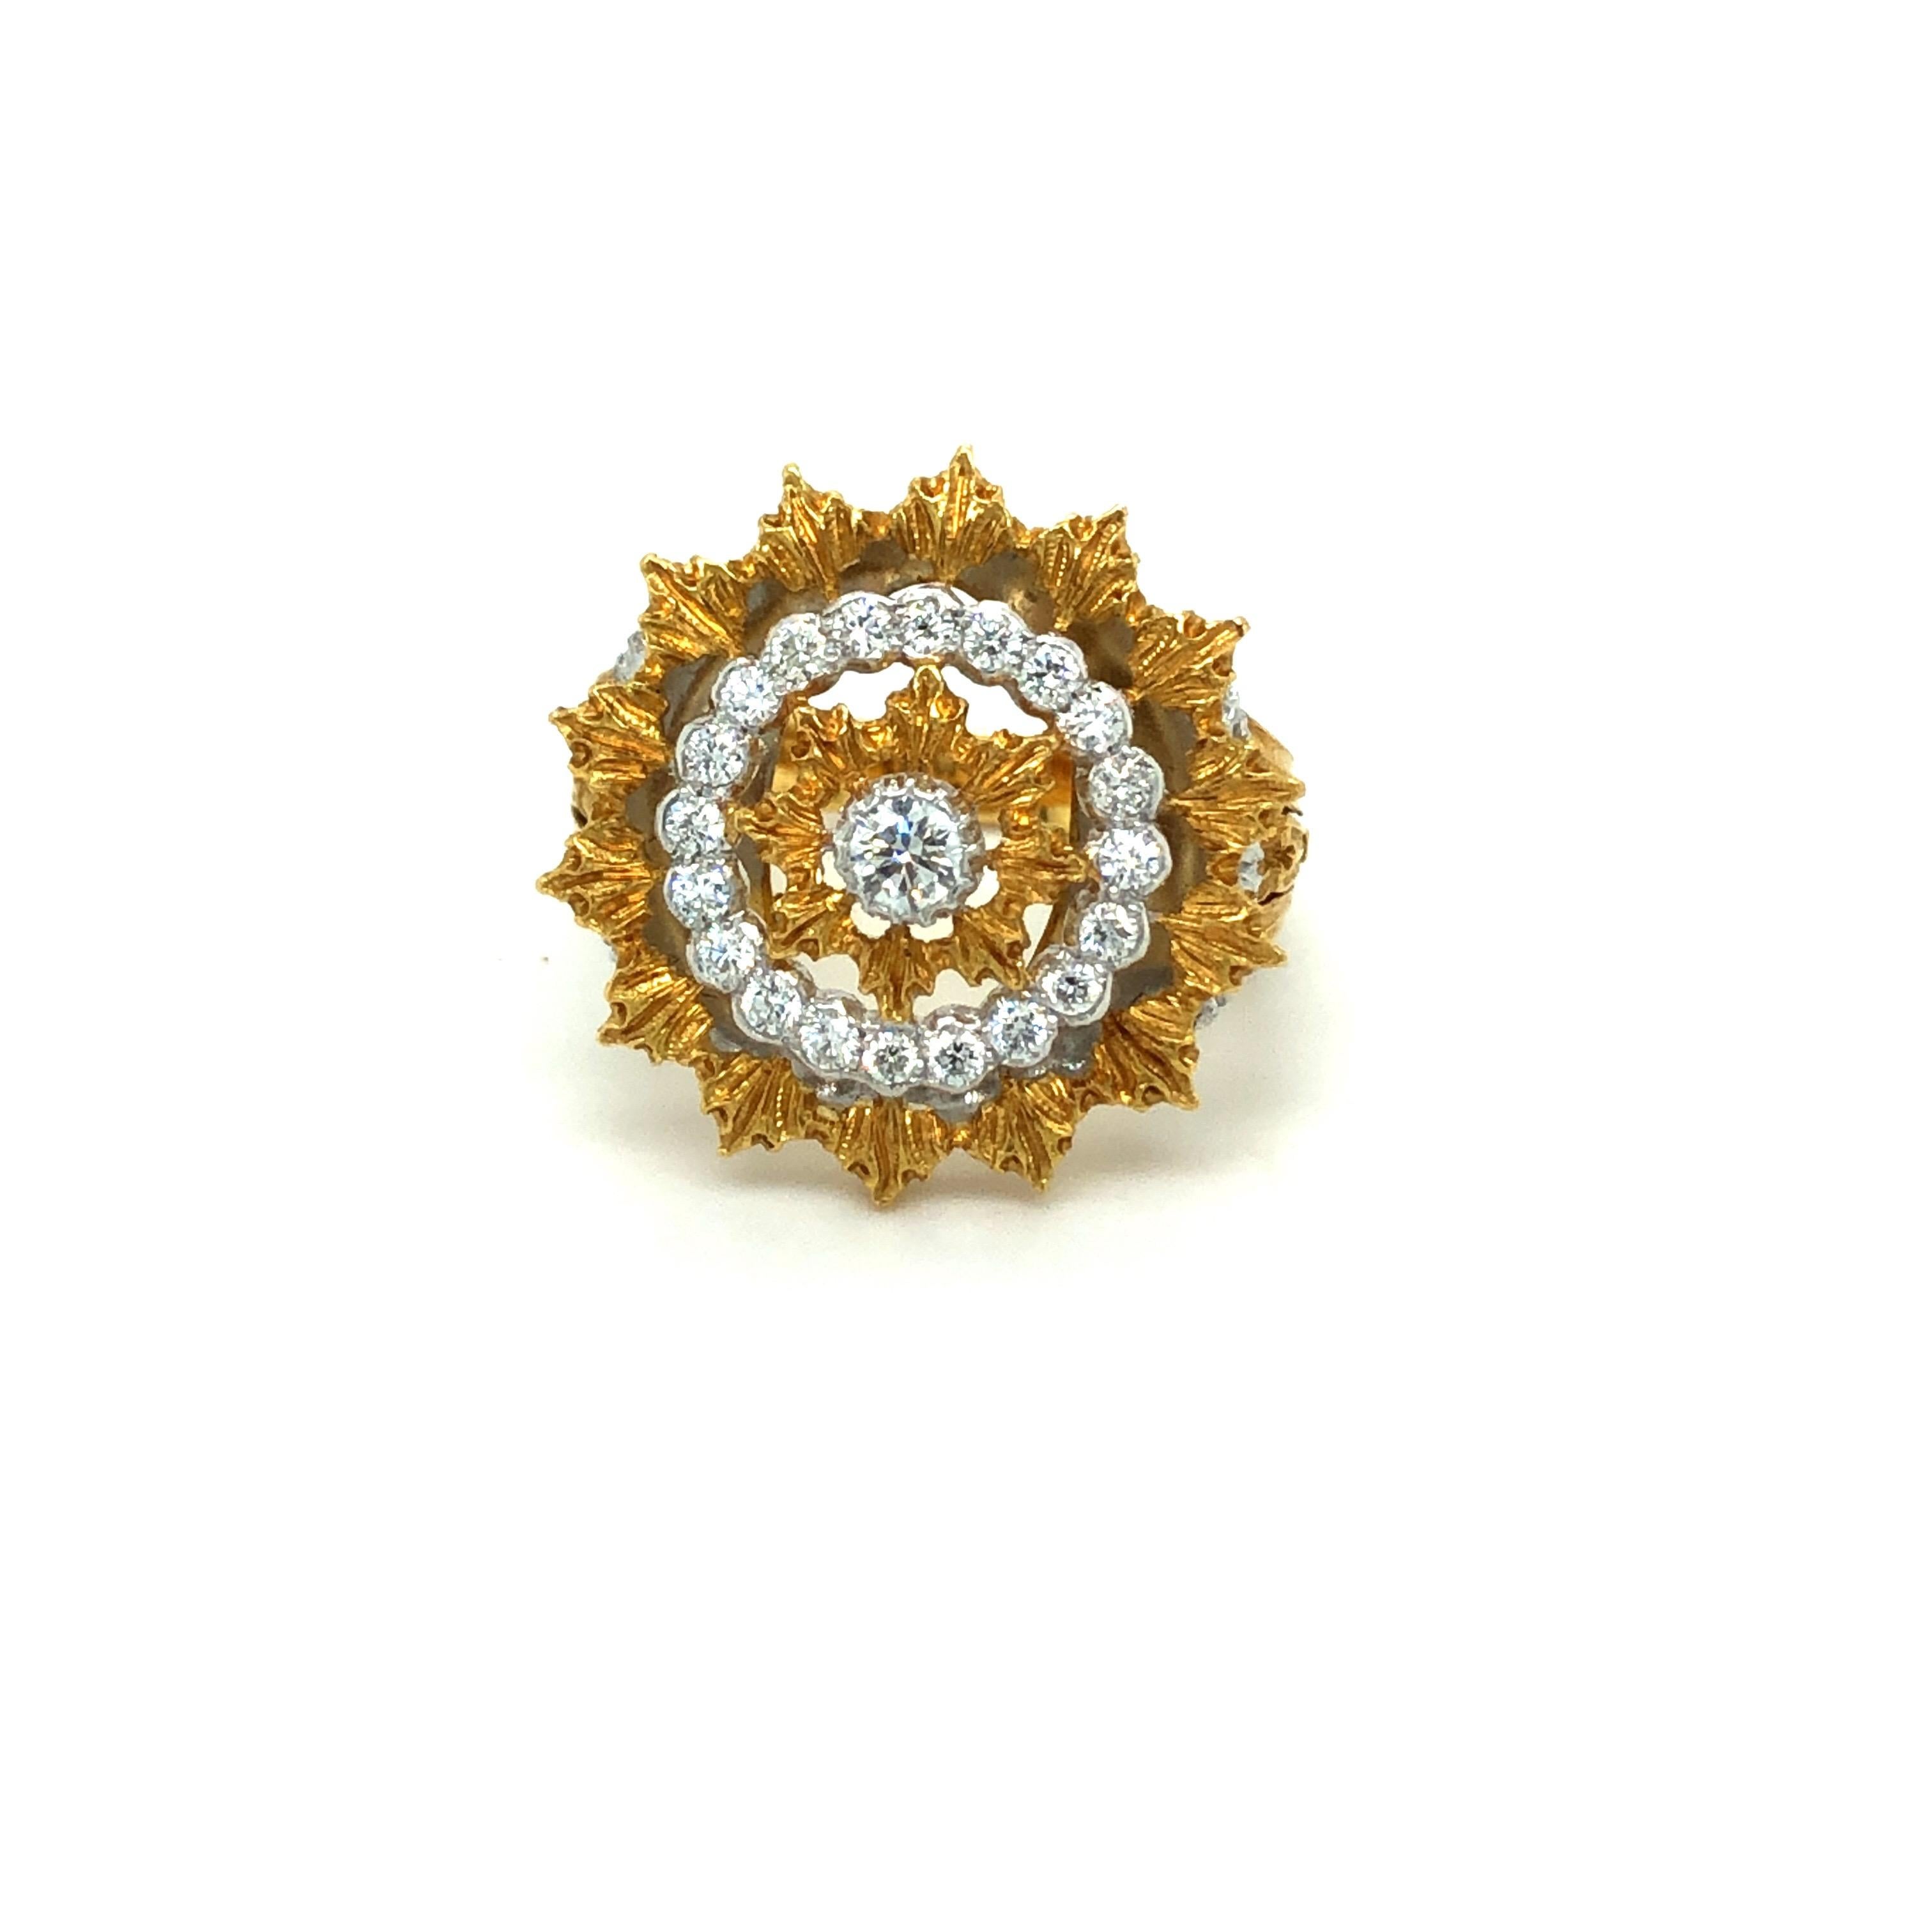 18 karat yellow gold Andromeda ring by renowned Italian brand Buccellati.
This charming ring is delicately crafted in 18 karat yellow and white gold and set with 21 brilliant-cut diamonds totalling about 0.4 carats.
The lacy appearance of the jewels